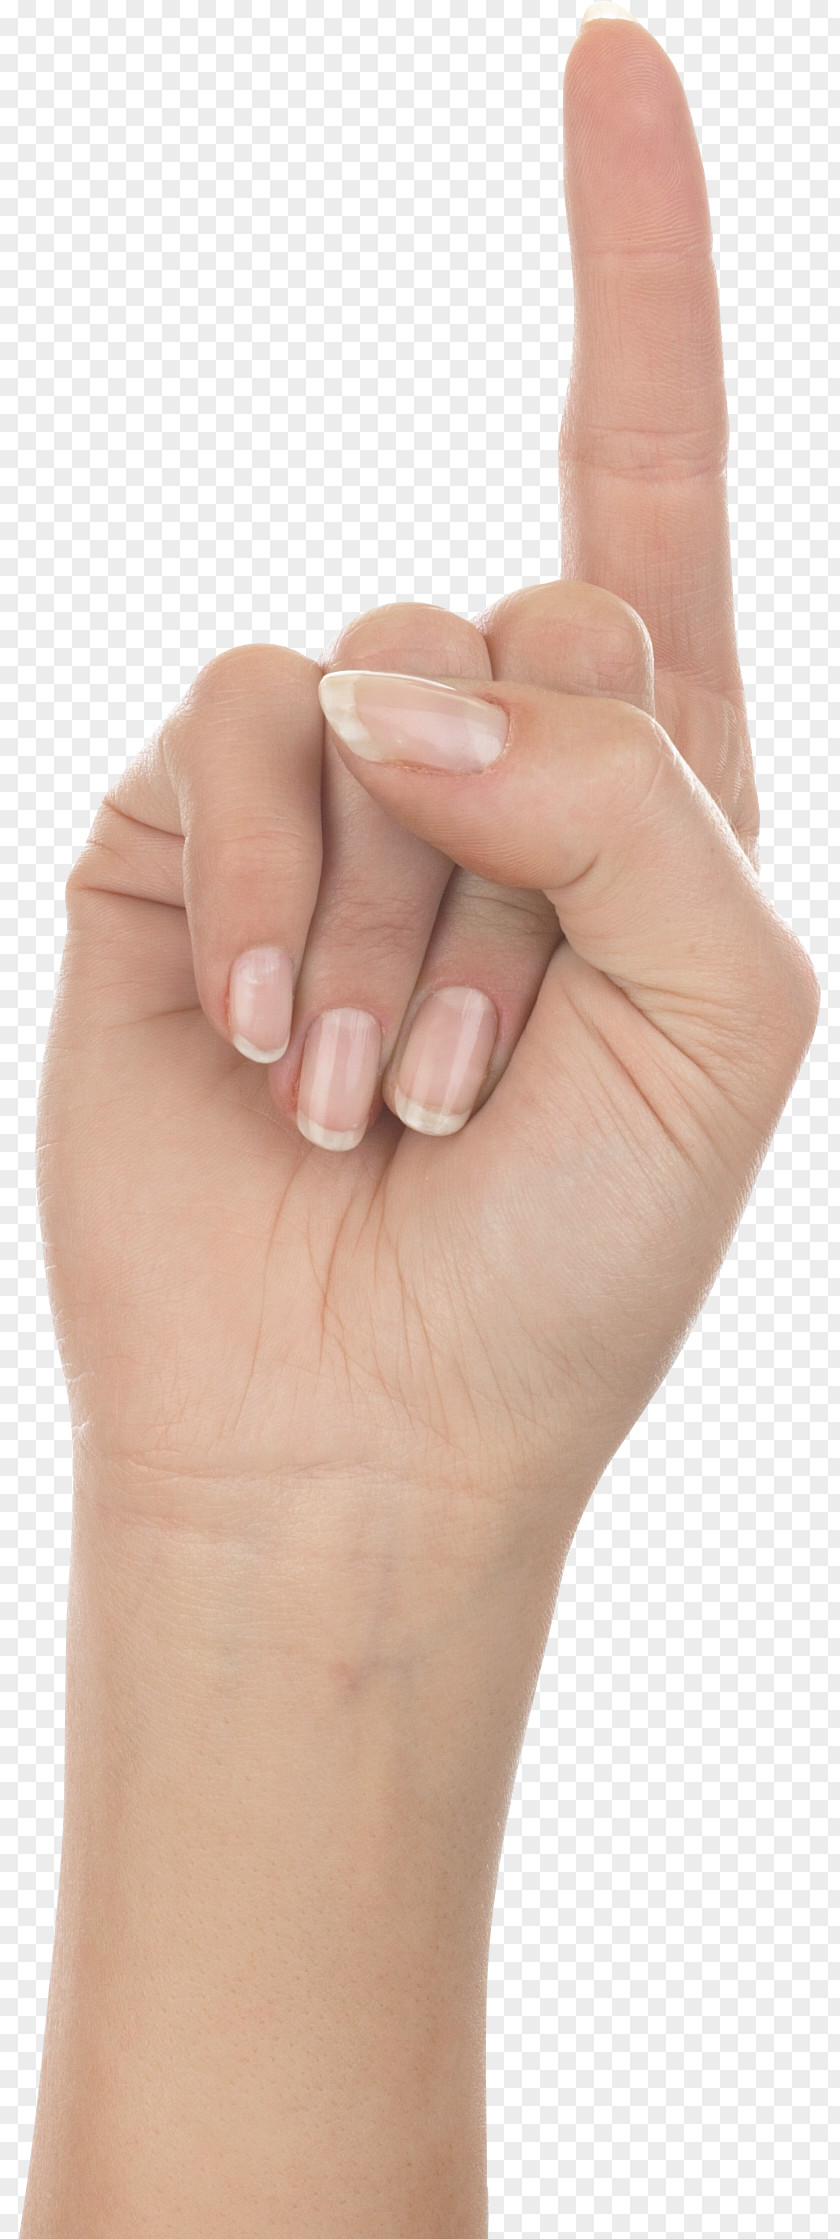 Hands , Hand Image Free PNG